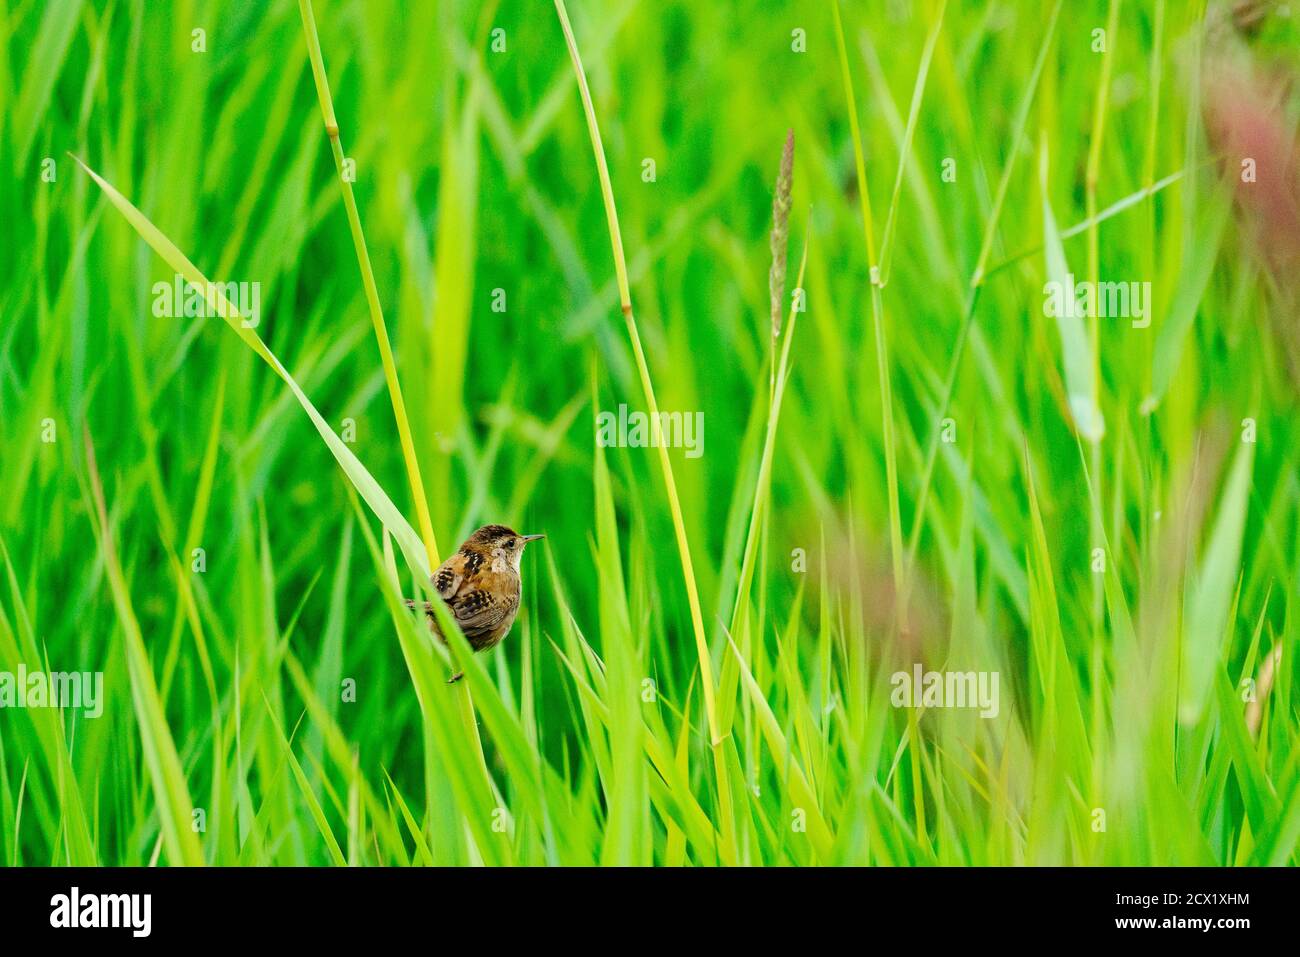 View from behind of a sparrow balancing on a blade of grass Stock Photo